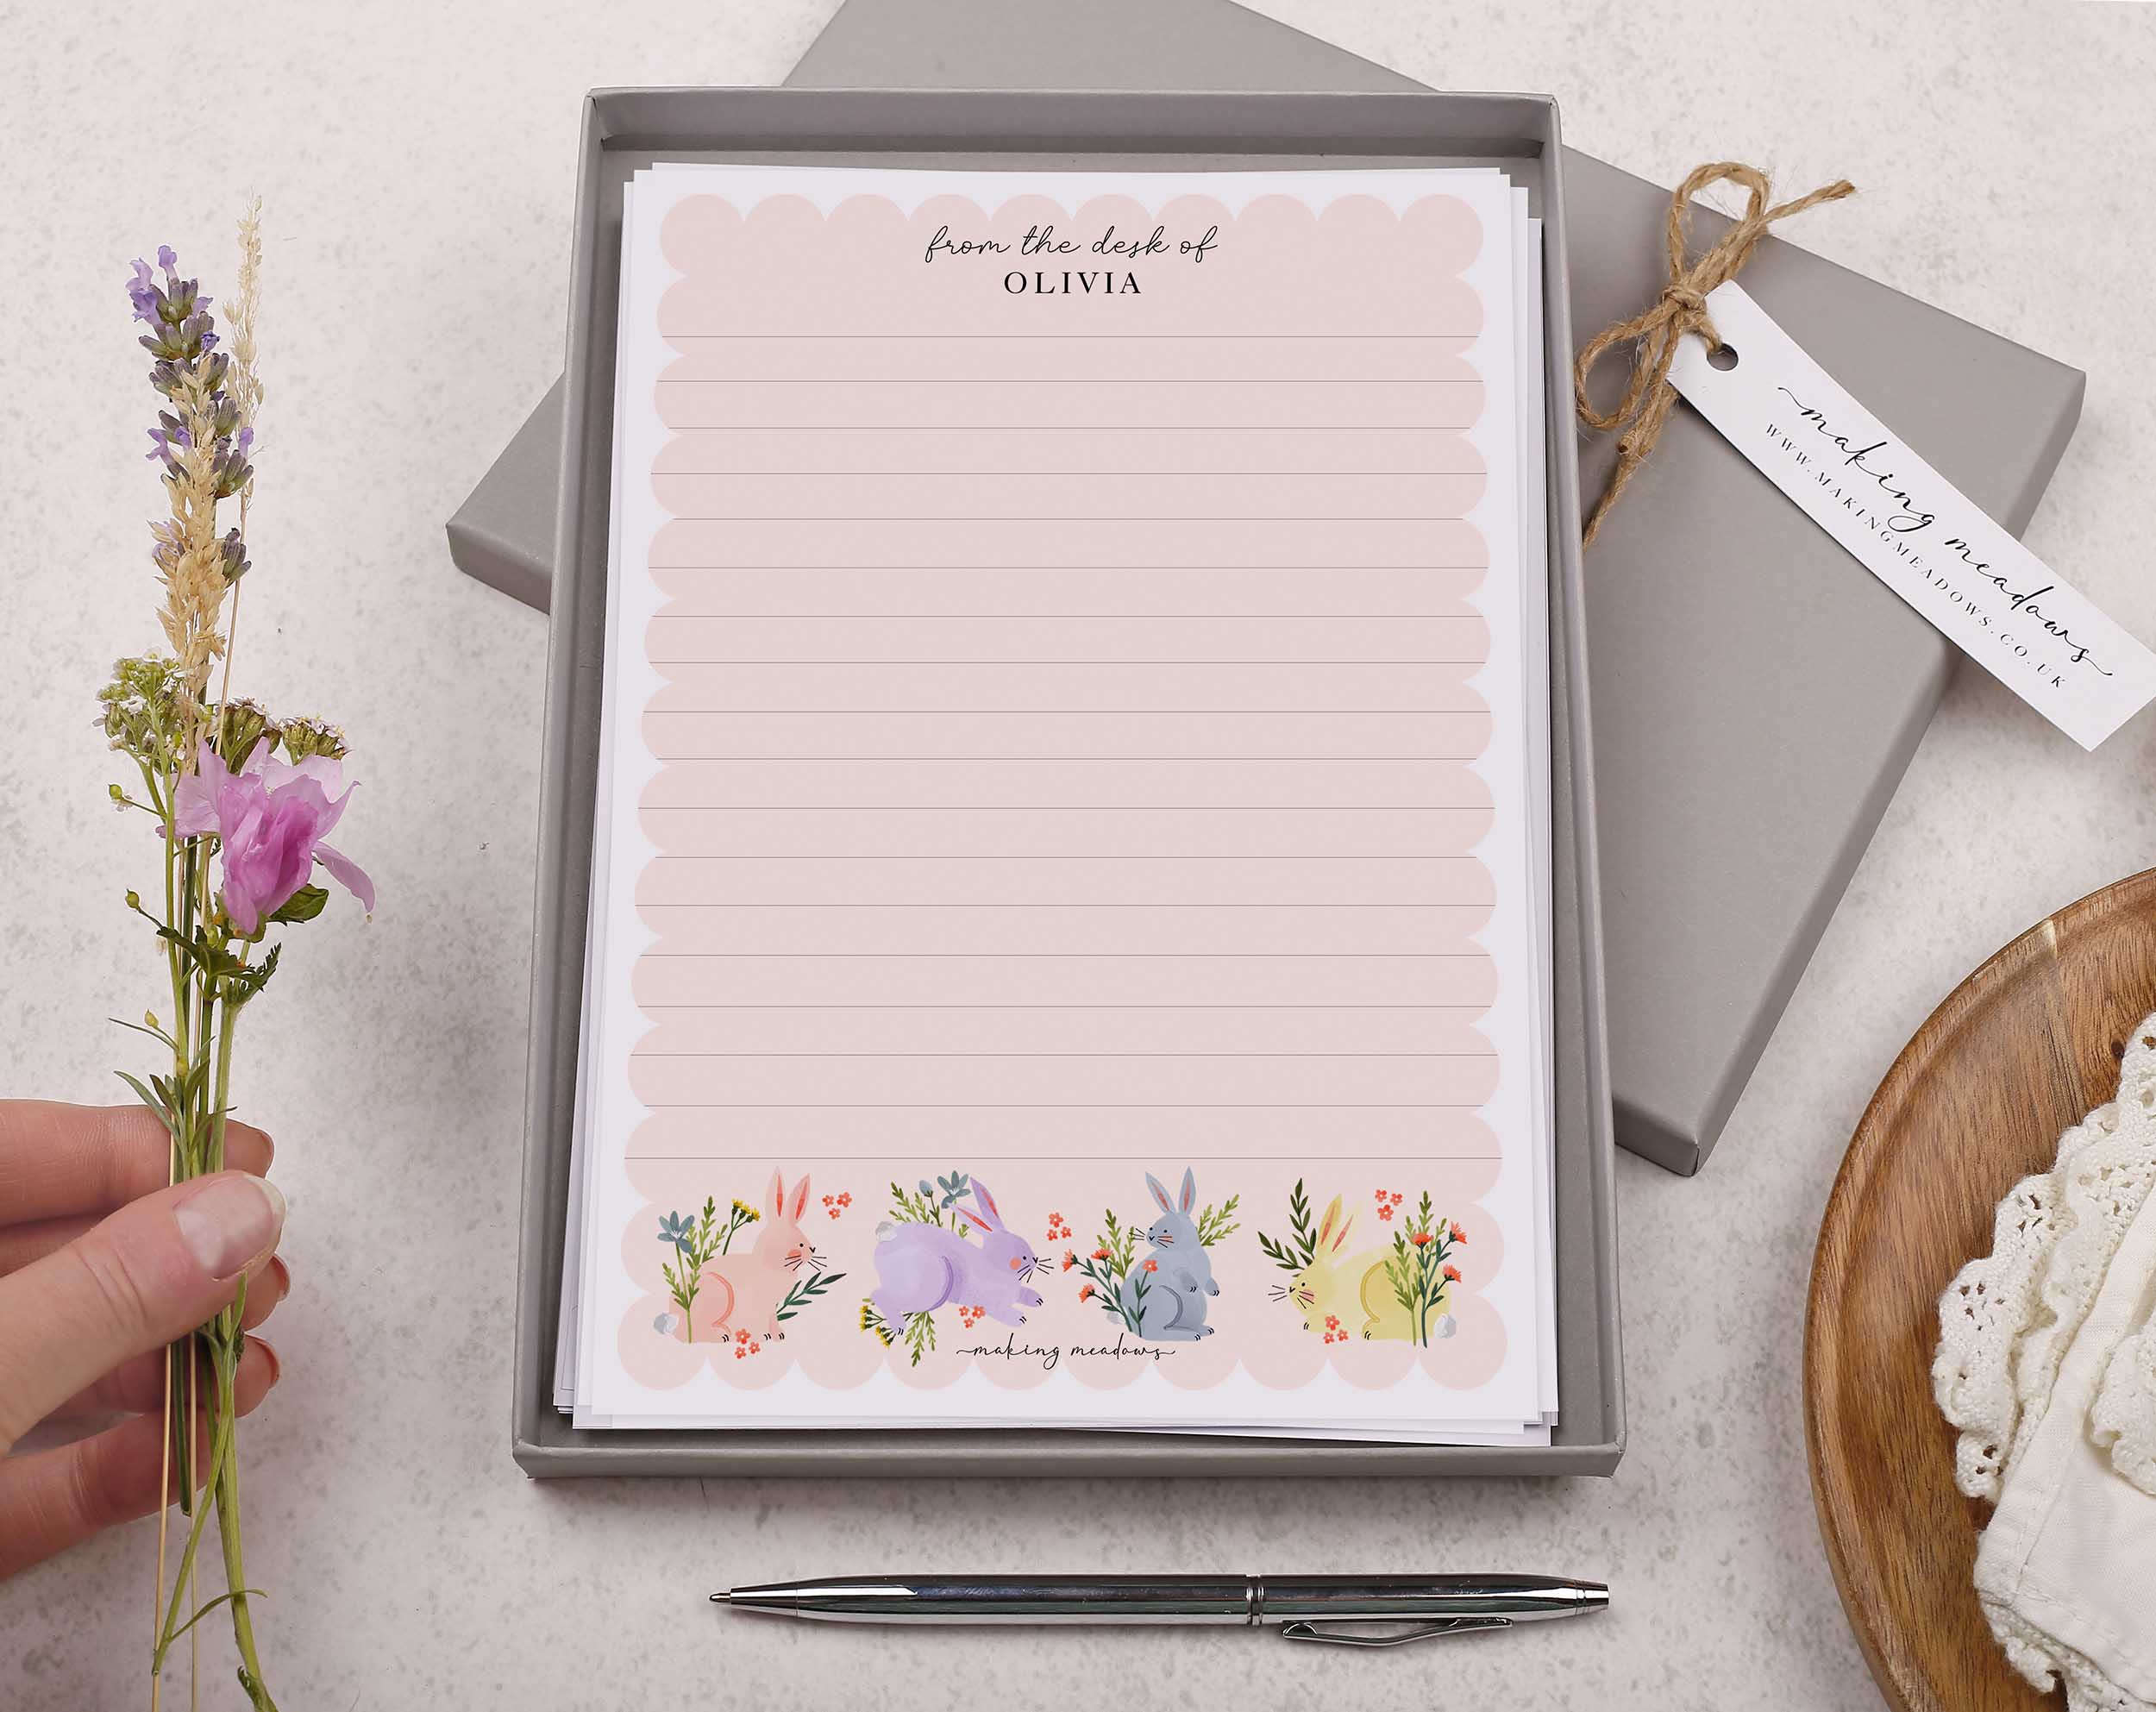 Premium personalised A5 letter writing paper set with bunny rabbits jumping through flowers and a super cute pink scalloped edge border